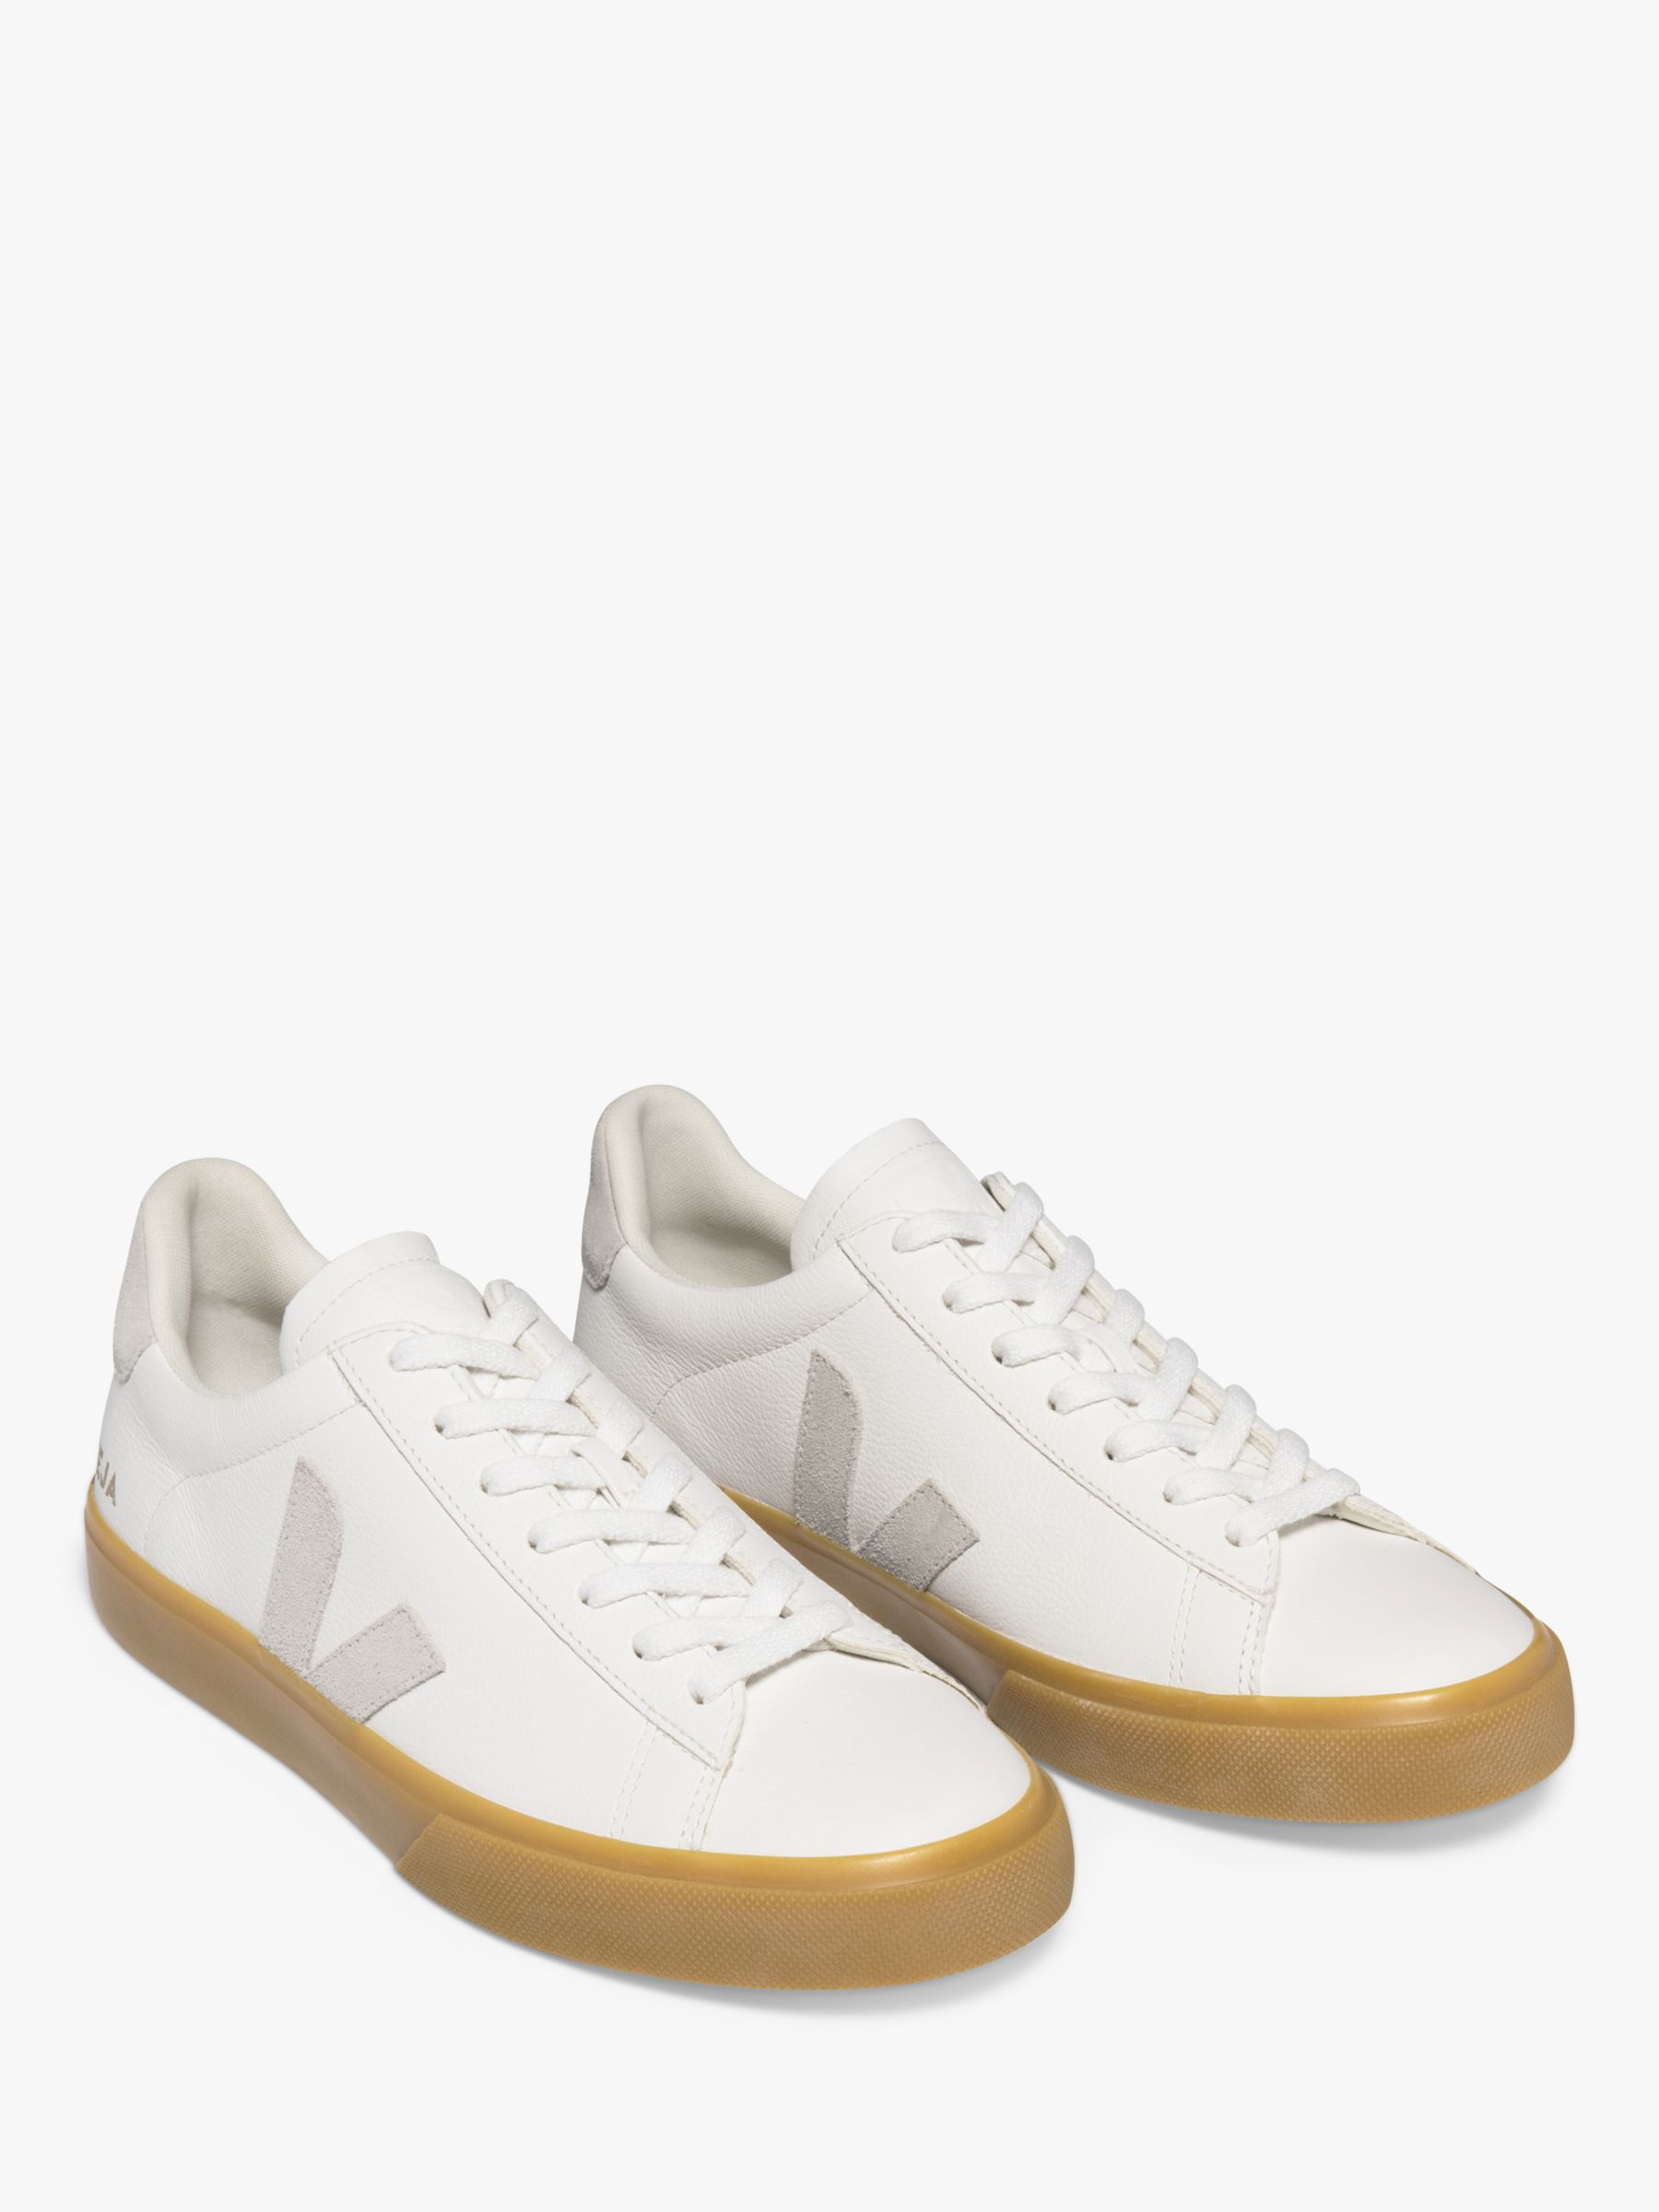 VEJA Campo Gum Sole Leather Trainers, White/Grey, 7